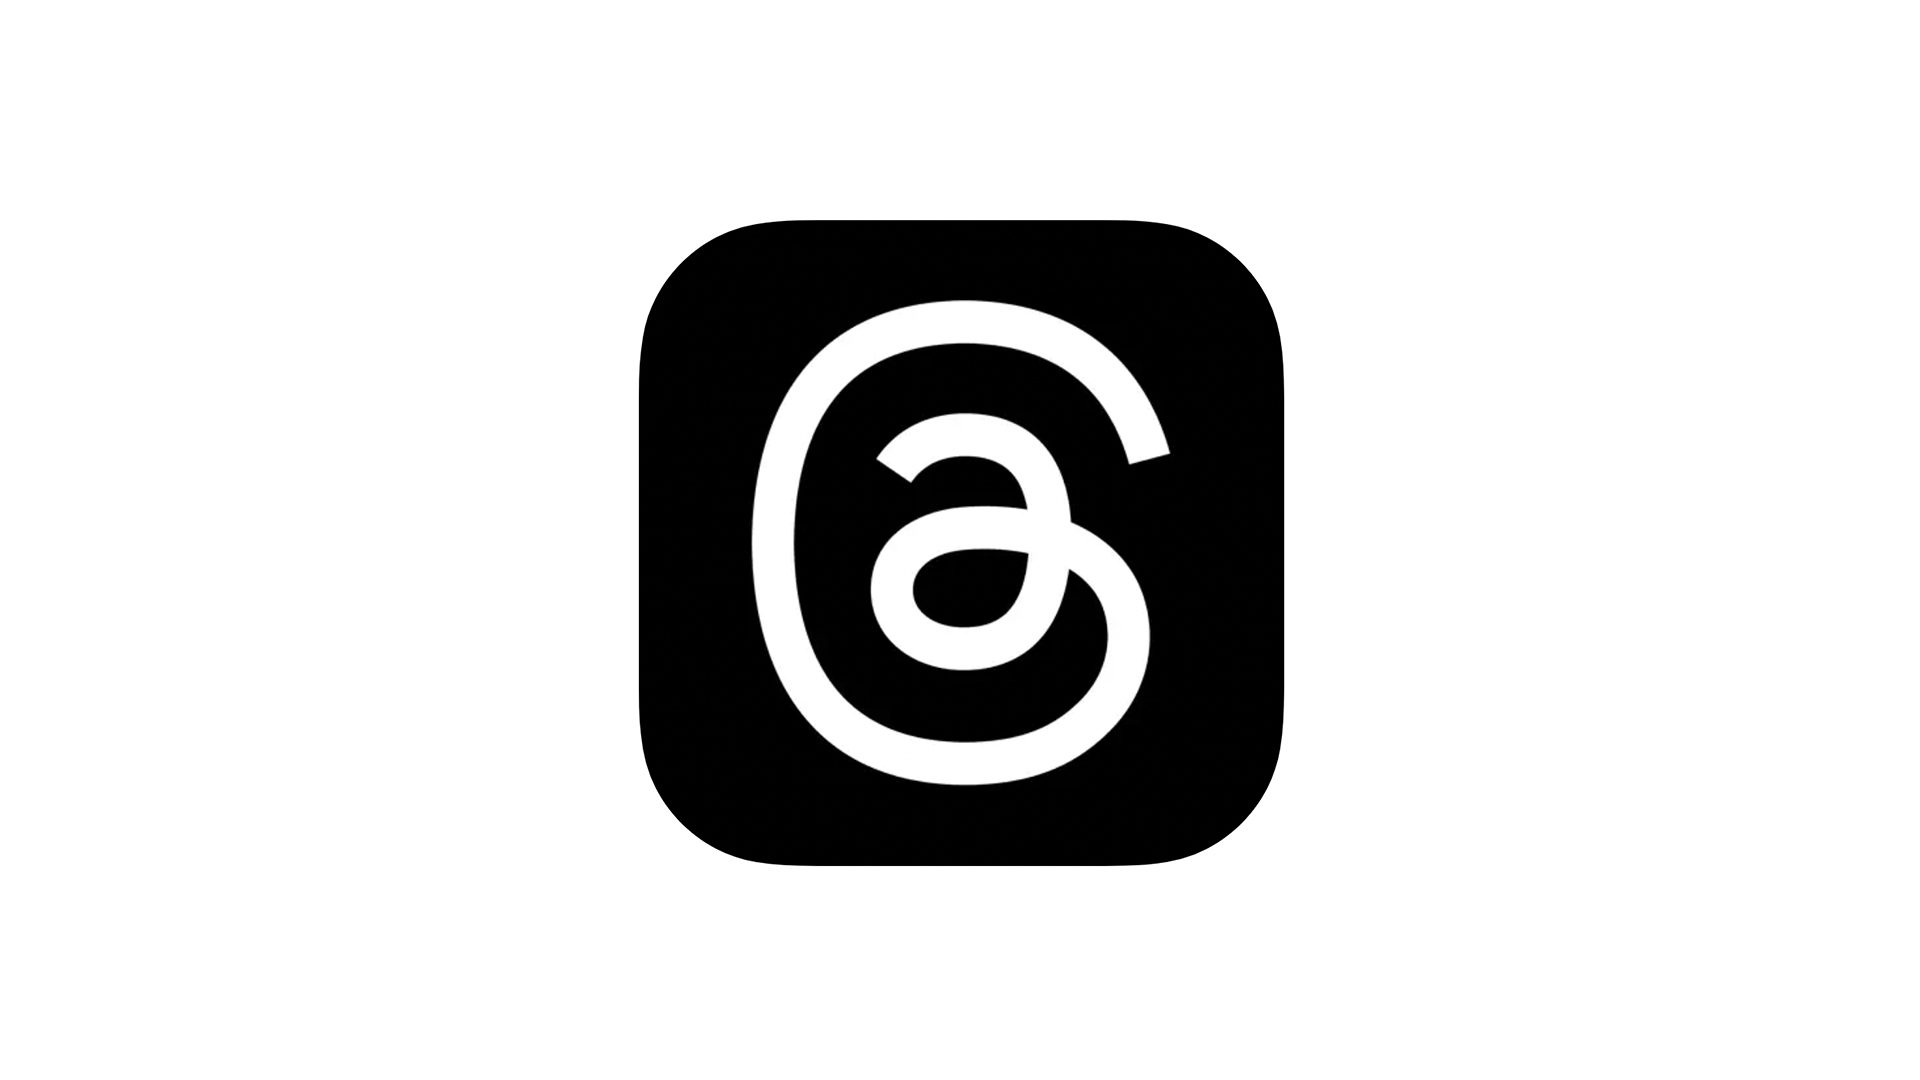 A black and white icon of an email symbol.